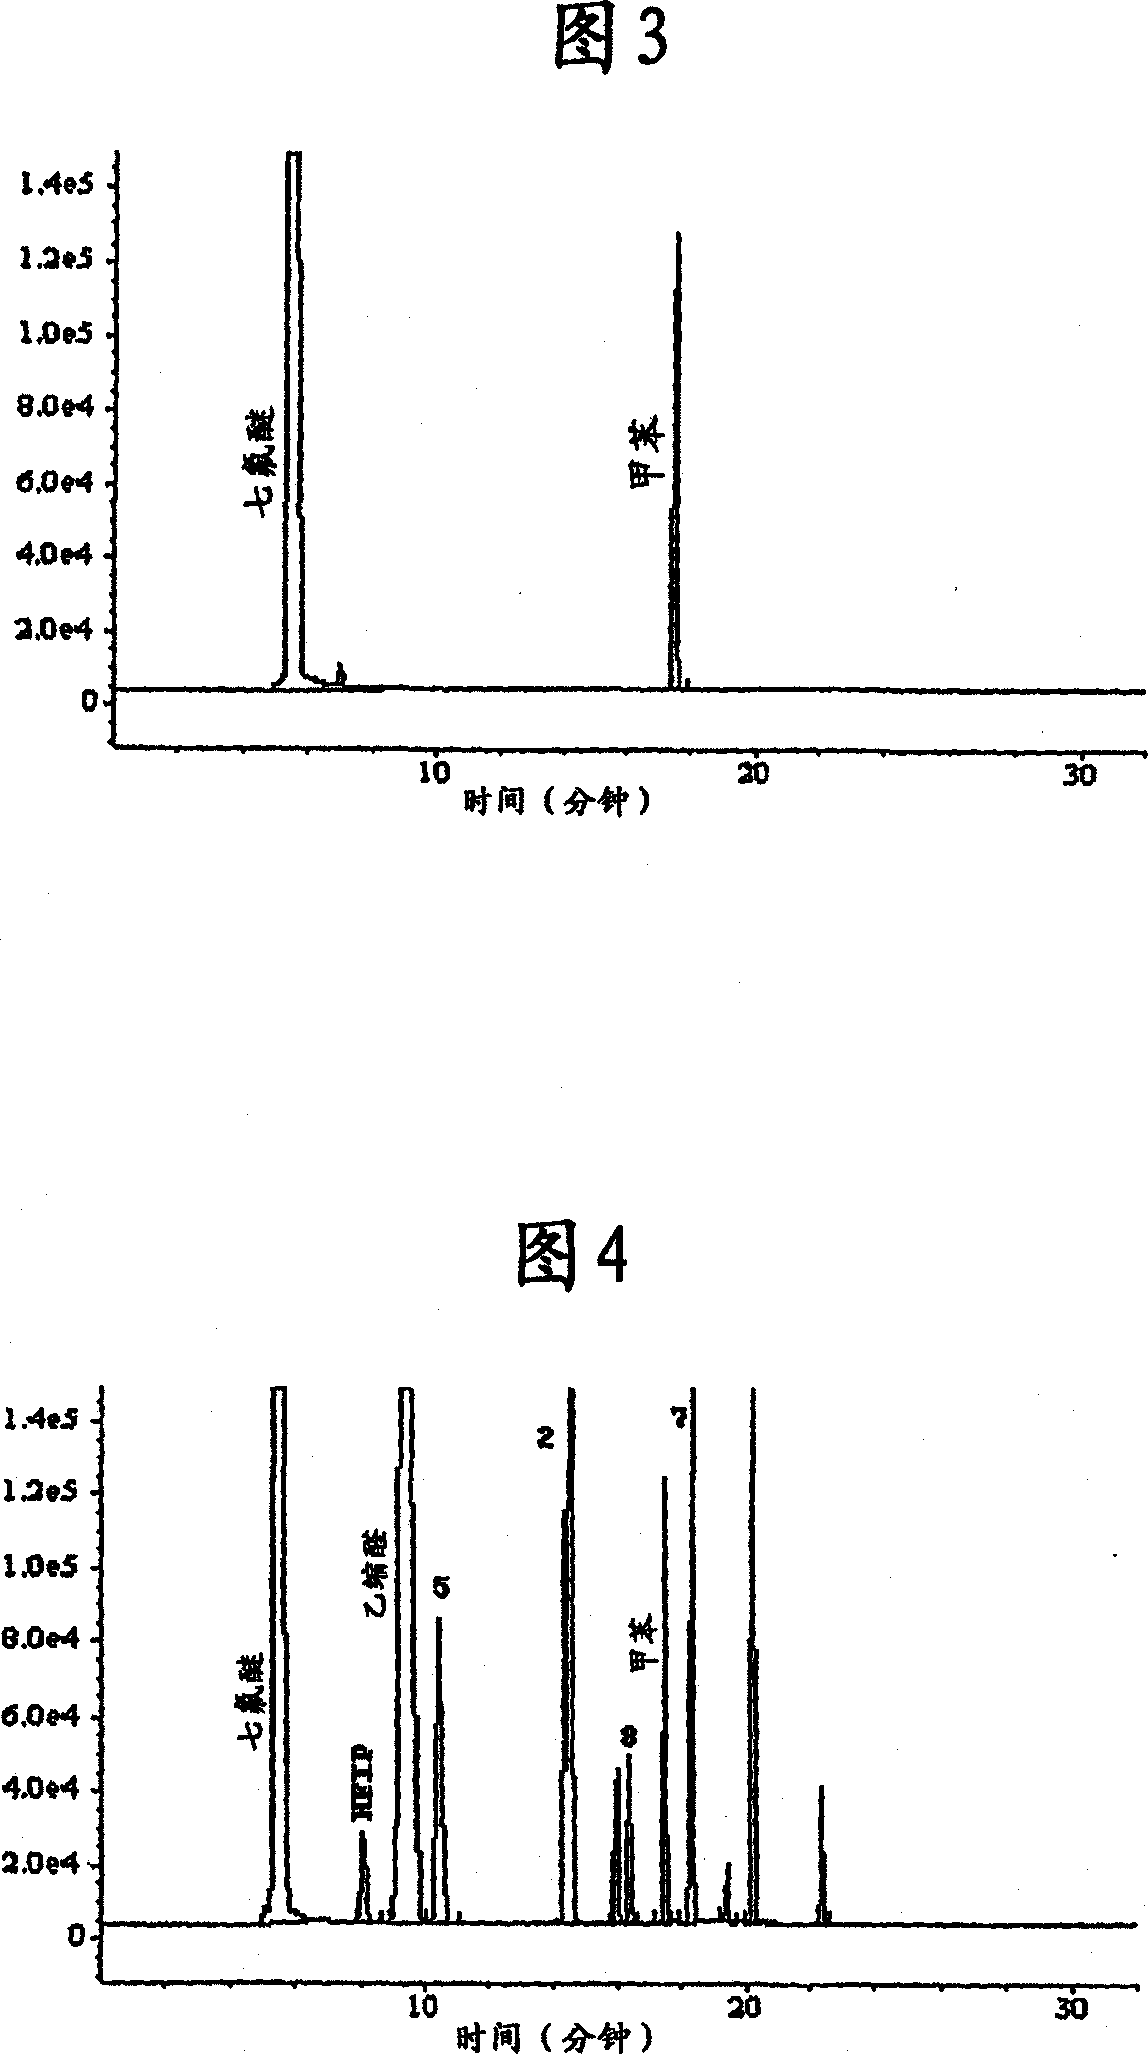 Stable pharmaceutical composition of fluoroether compound for anesthetic use, method for stabilizing a fluoroether compound, use of stabilizer agent for precluding the degradation of a fluoroether com